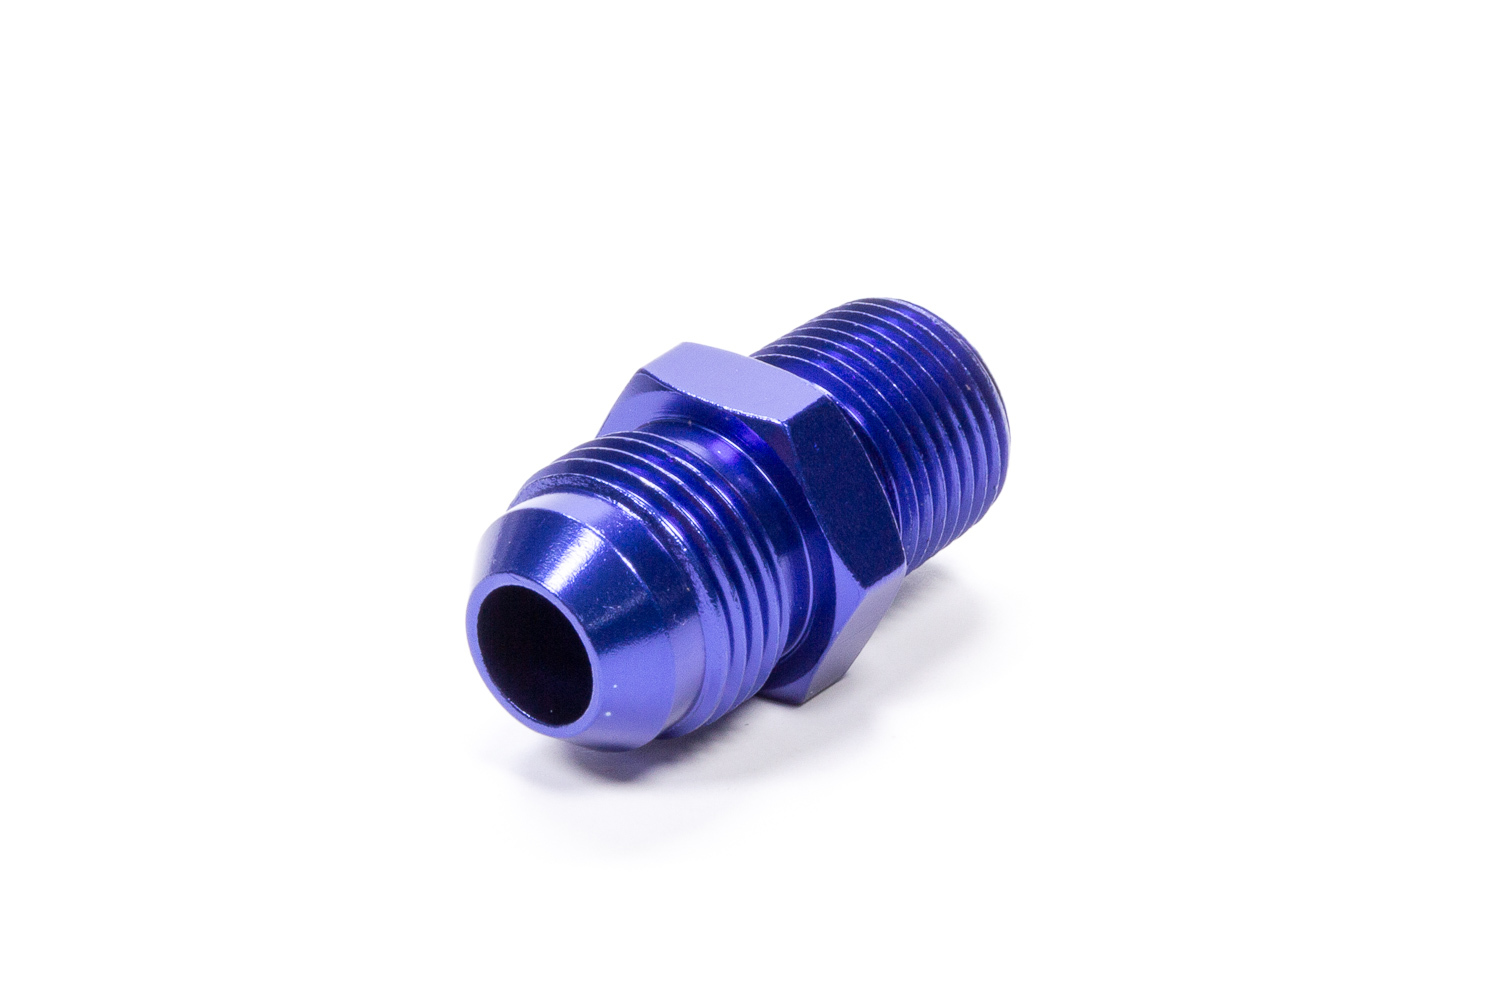 Fragola 481608 - Straight Adapter Fitting #8 x 3/8 MPT